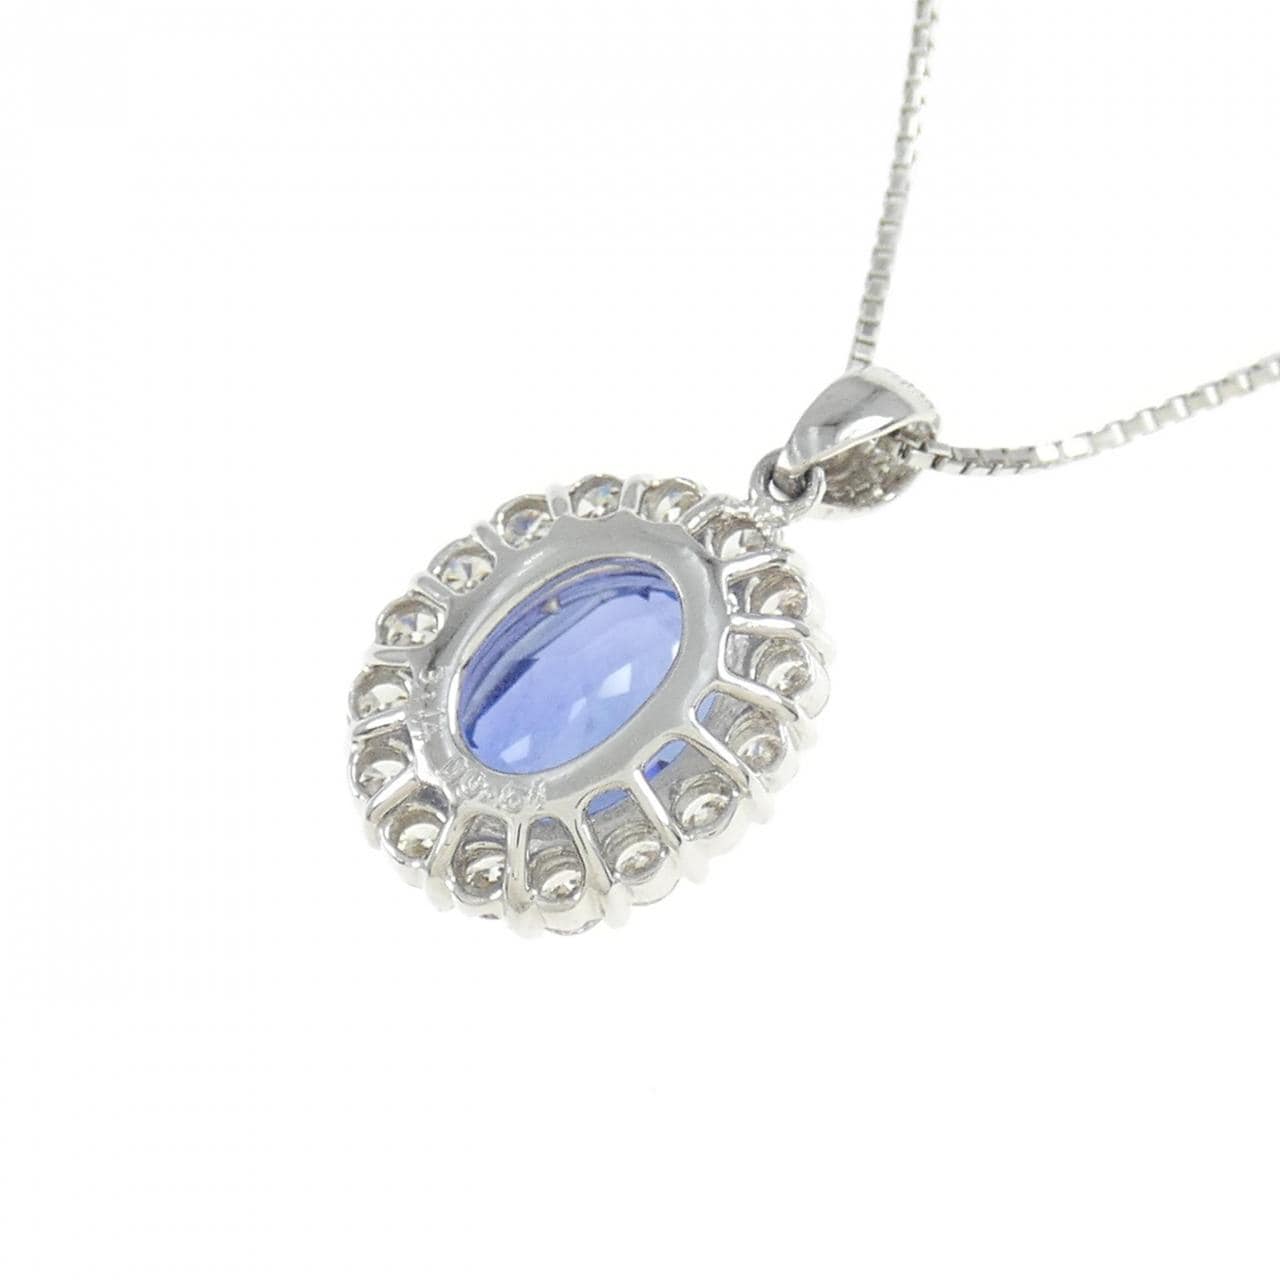 [Remake] PT Unheated Sapphire Necklace 3.14CT Made in Burma